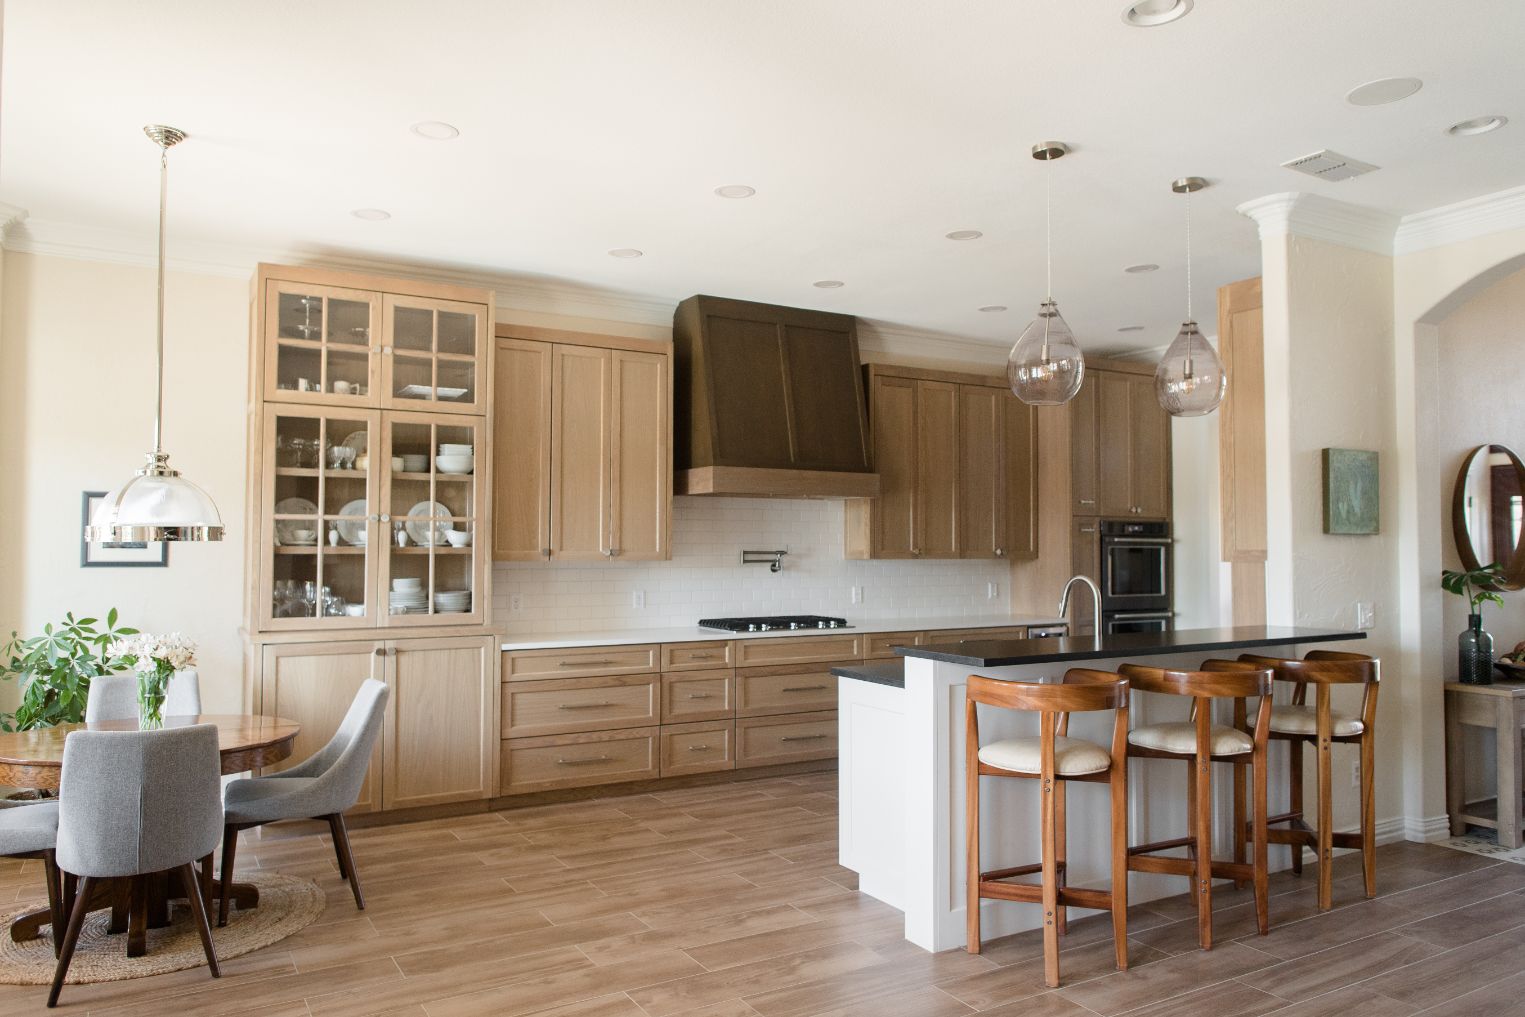 Transitional Kitchen Featuring Light Wood Floors and Accents on Cabinets